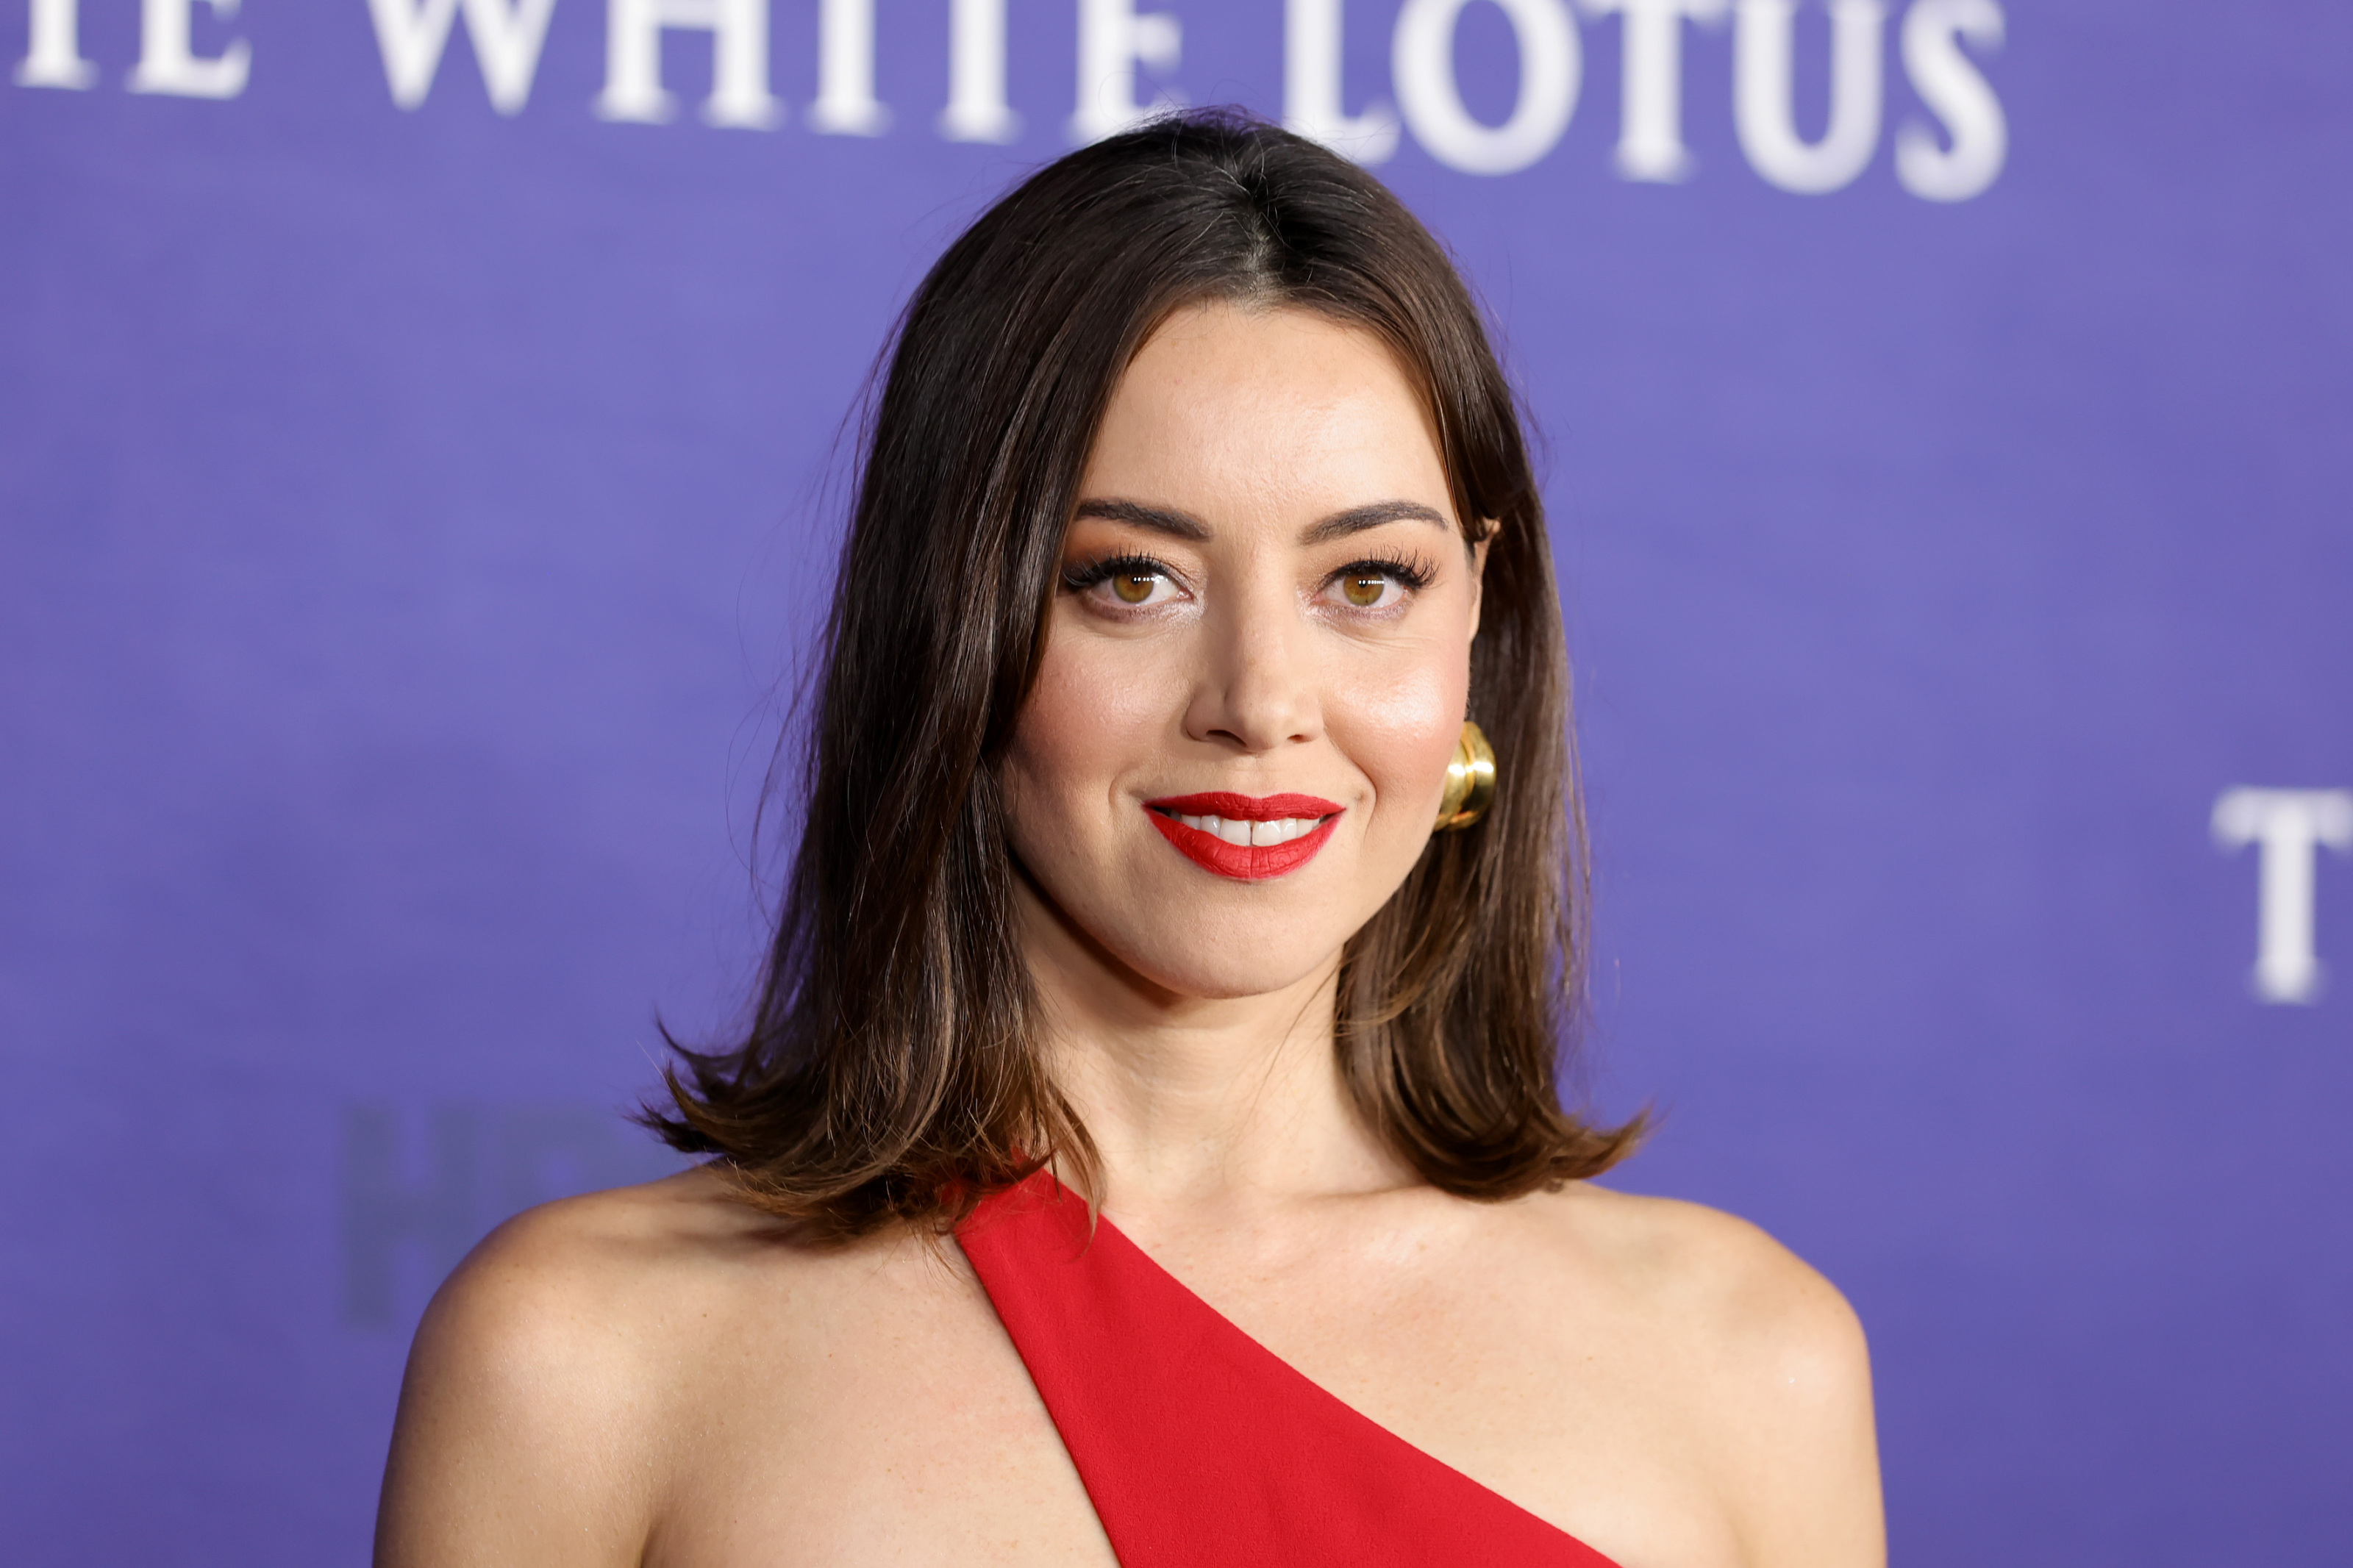 Watch: Aubrey Plaza shares her 'fantasy' ending for 'White Lotus